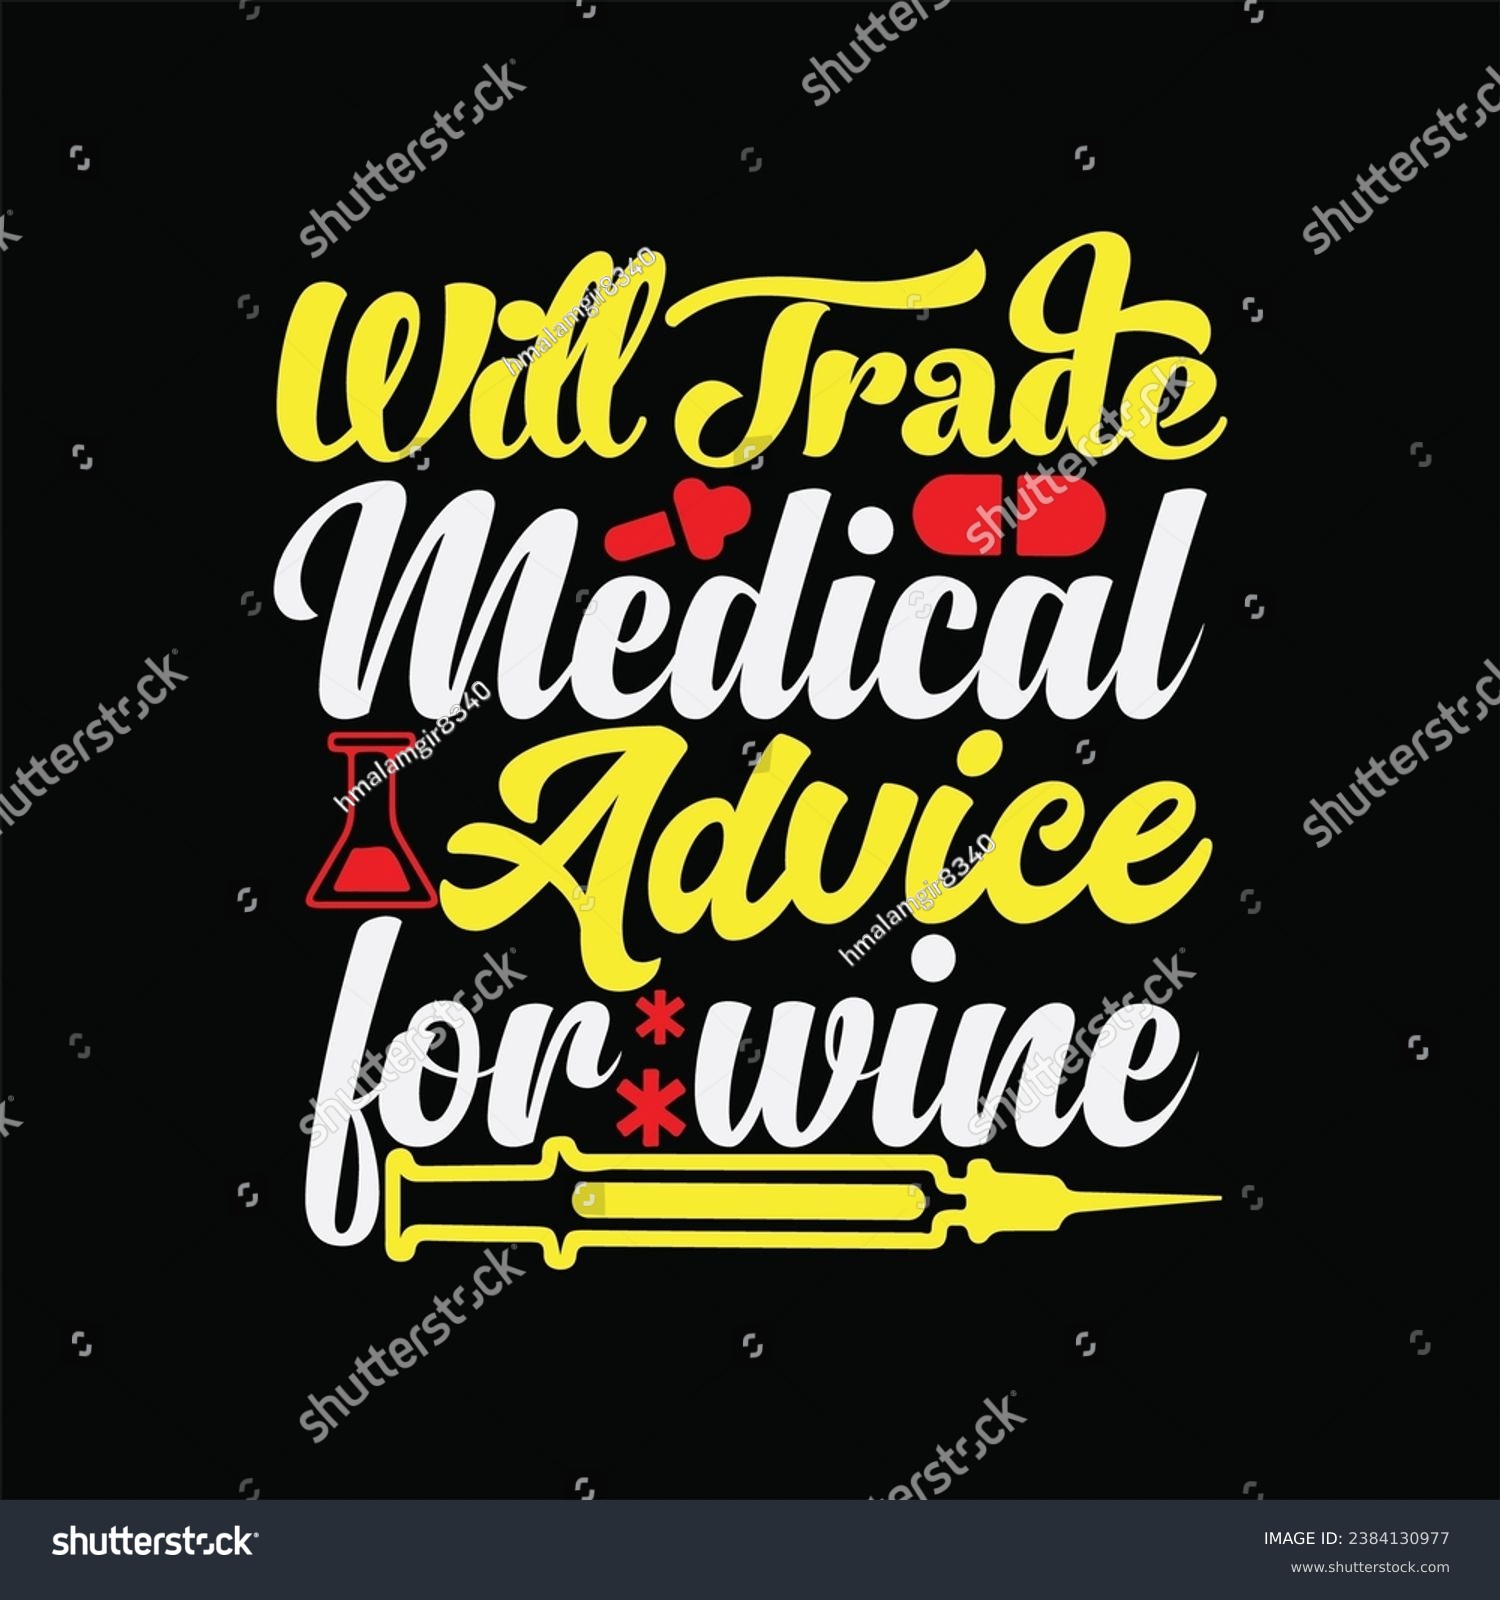 SVG of Will Trade Medical Advice for Wine 3 t-shirt design. Here You Can find and Buy t-Shirt Design. Digital Files for yourself, friends and family, or anyone who supports your Special Day and Occasions. svg